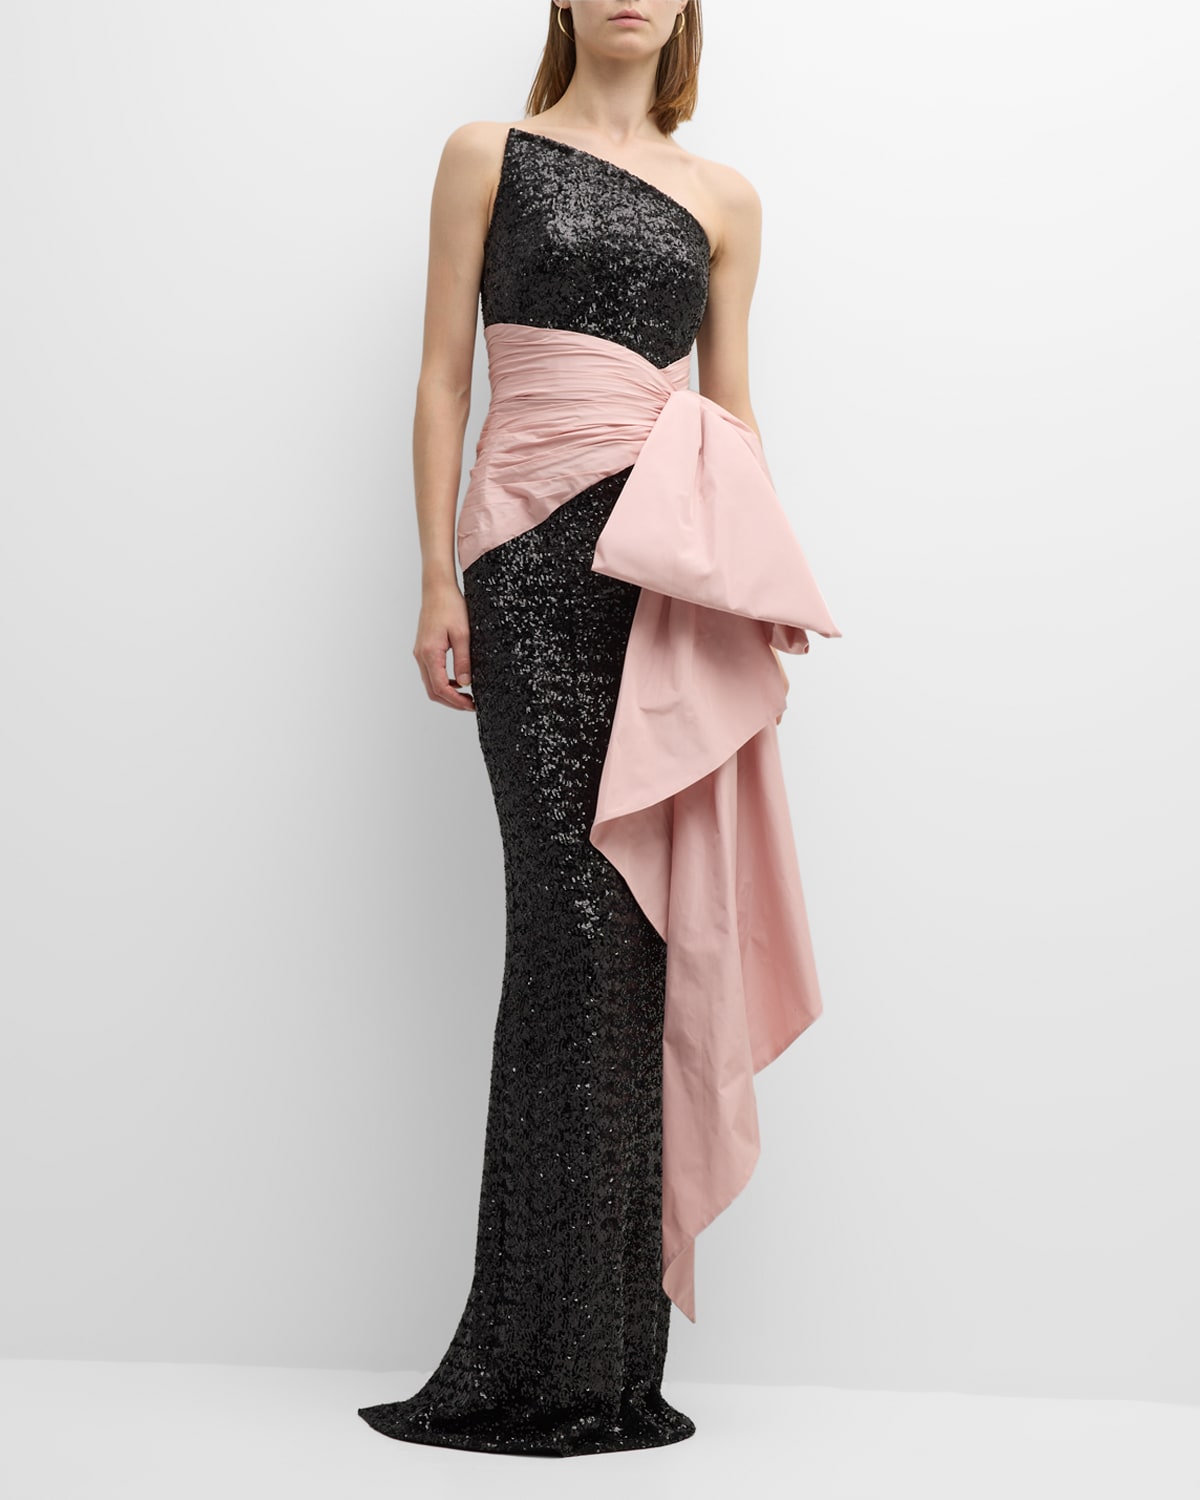 PAMELLA ROLAND STRAPLESS STRETCH SEQUIN GOWN WITH TAFFETA BOW SASH